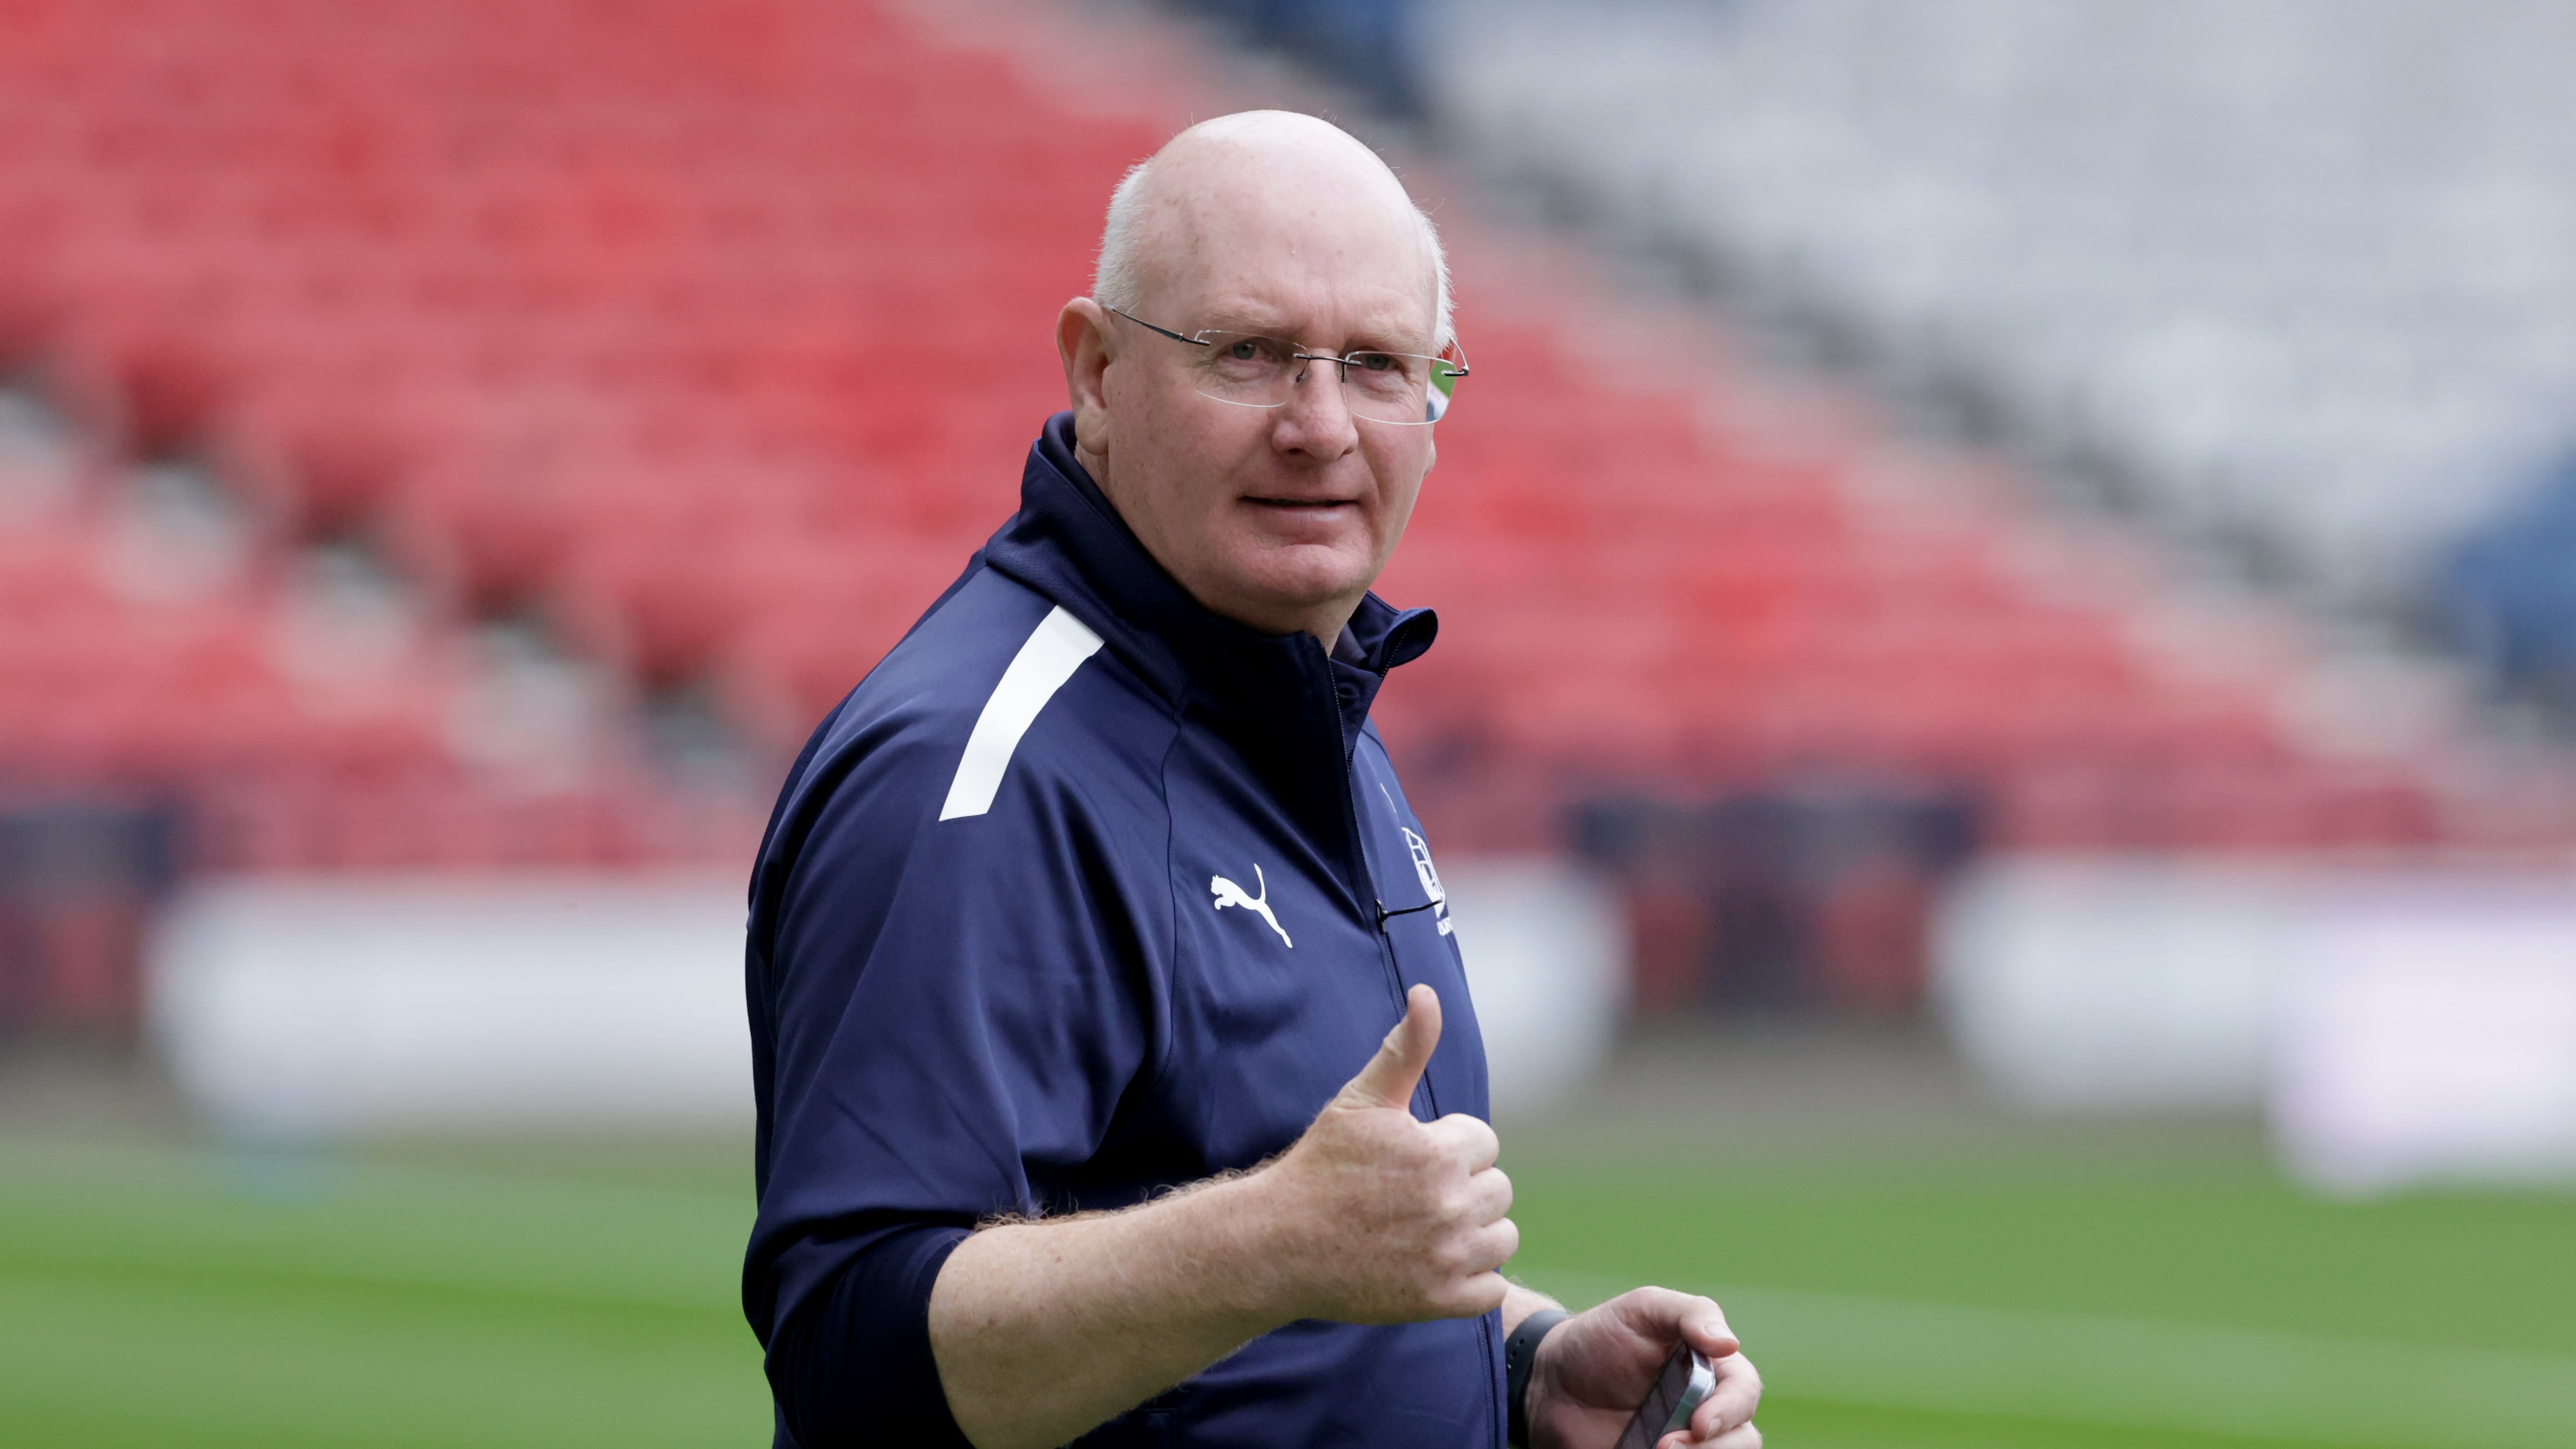 Falkirk manager John McGlynn saw his side mount a second-half comeback